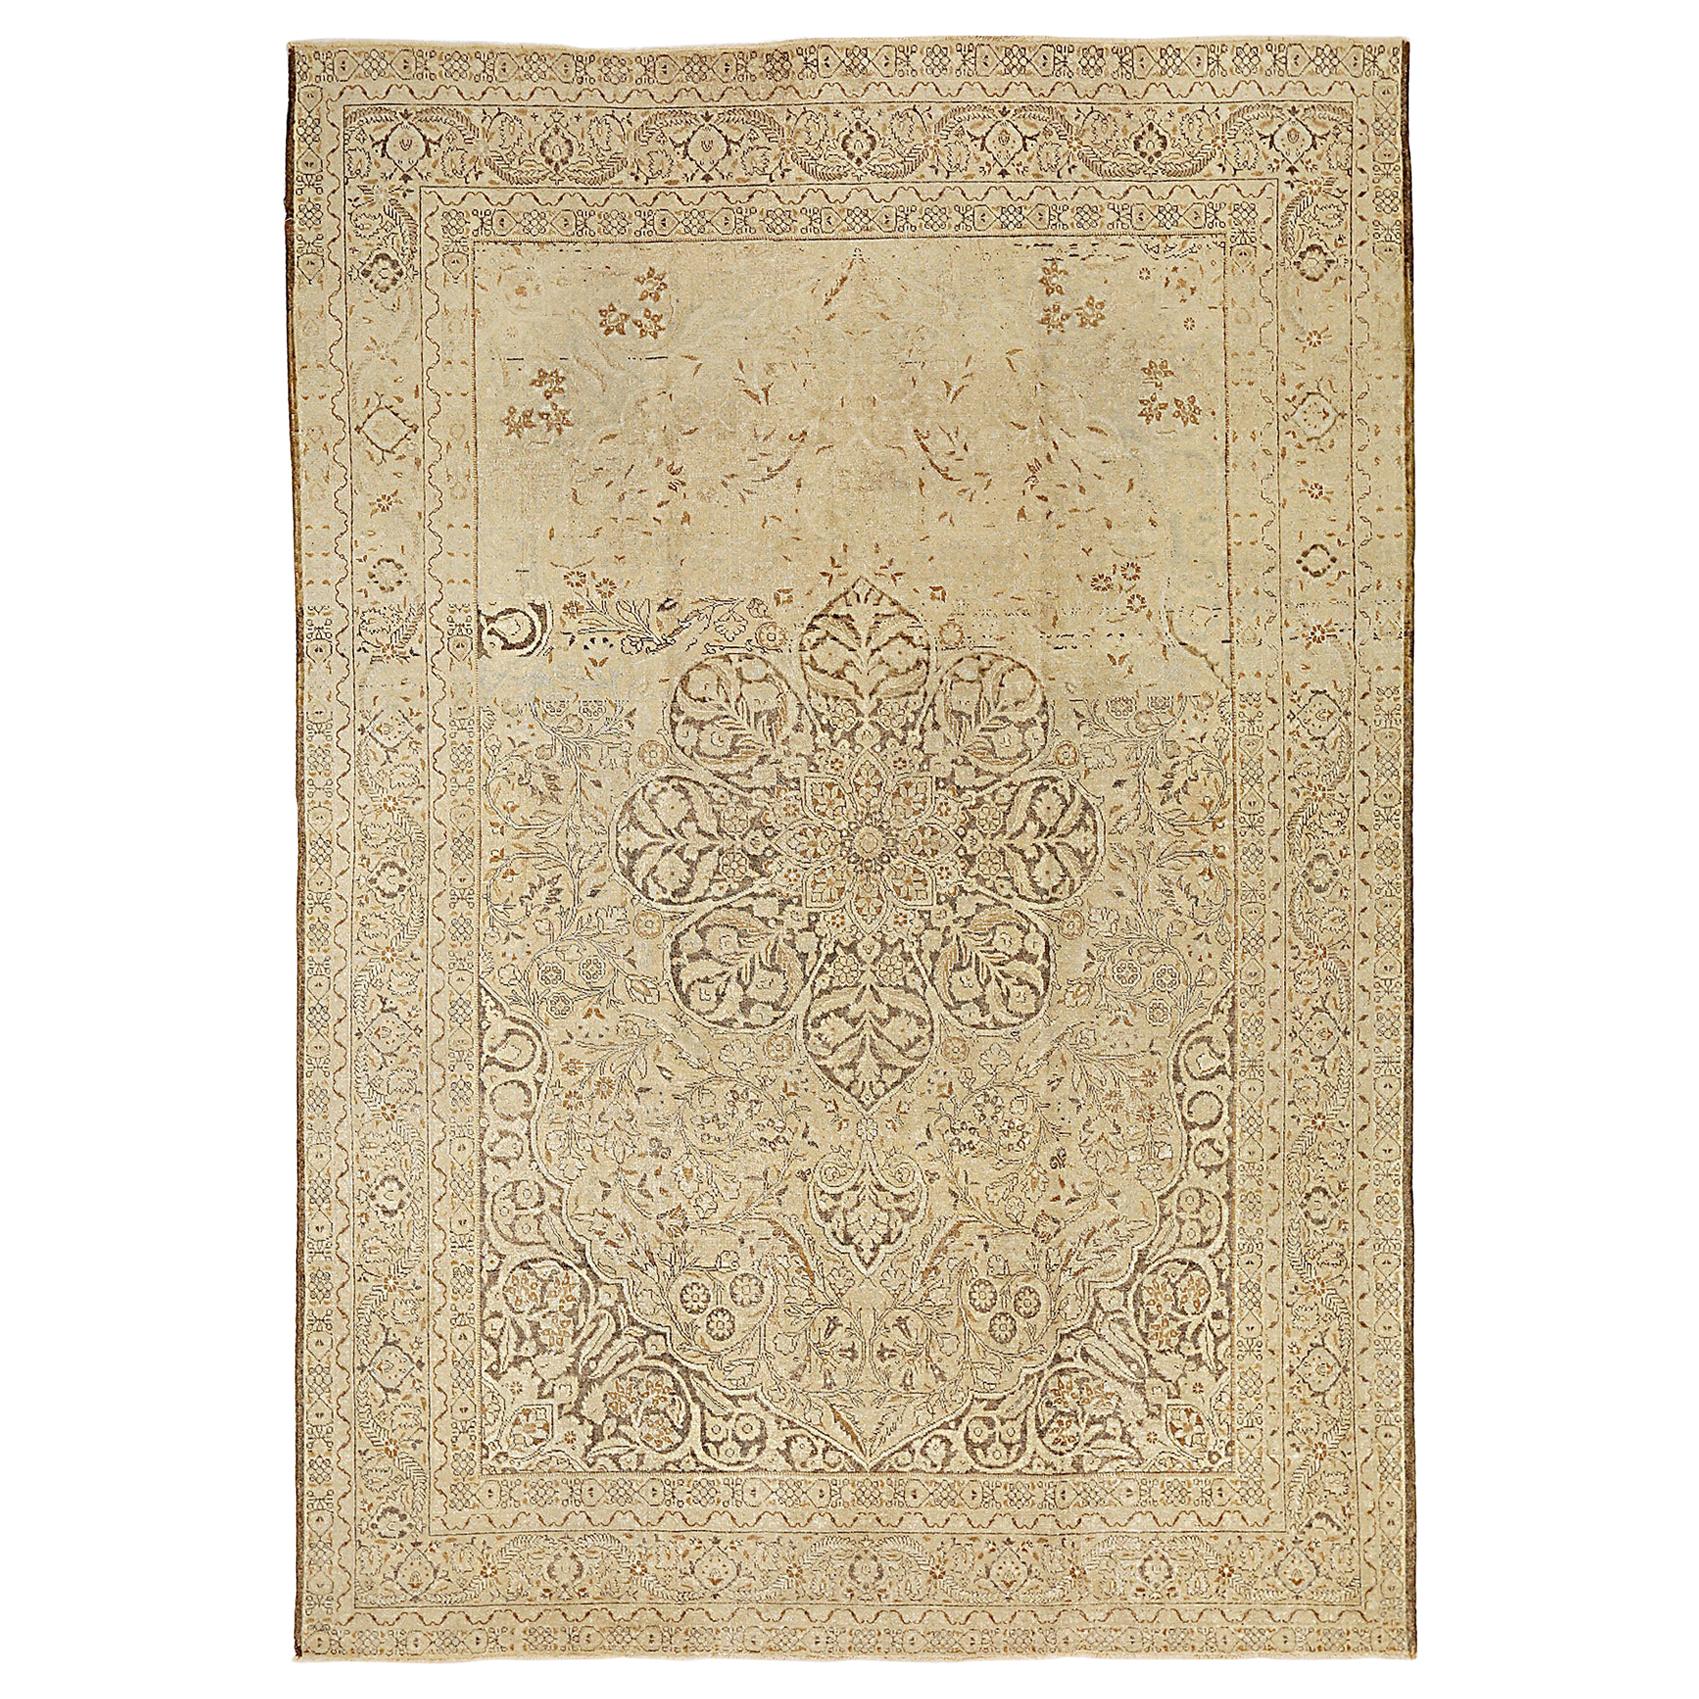 20th Century Antique Persian Tabriz Rug with Black & Brown Flower Motifs For Sale